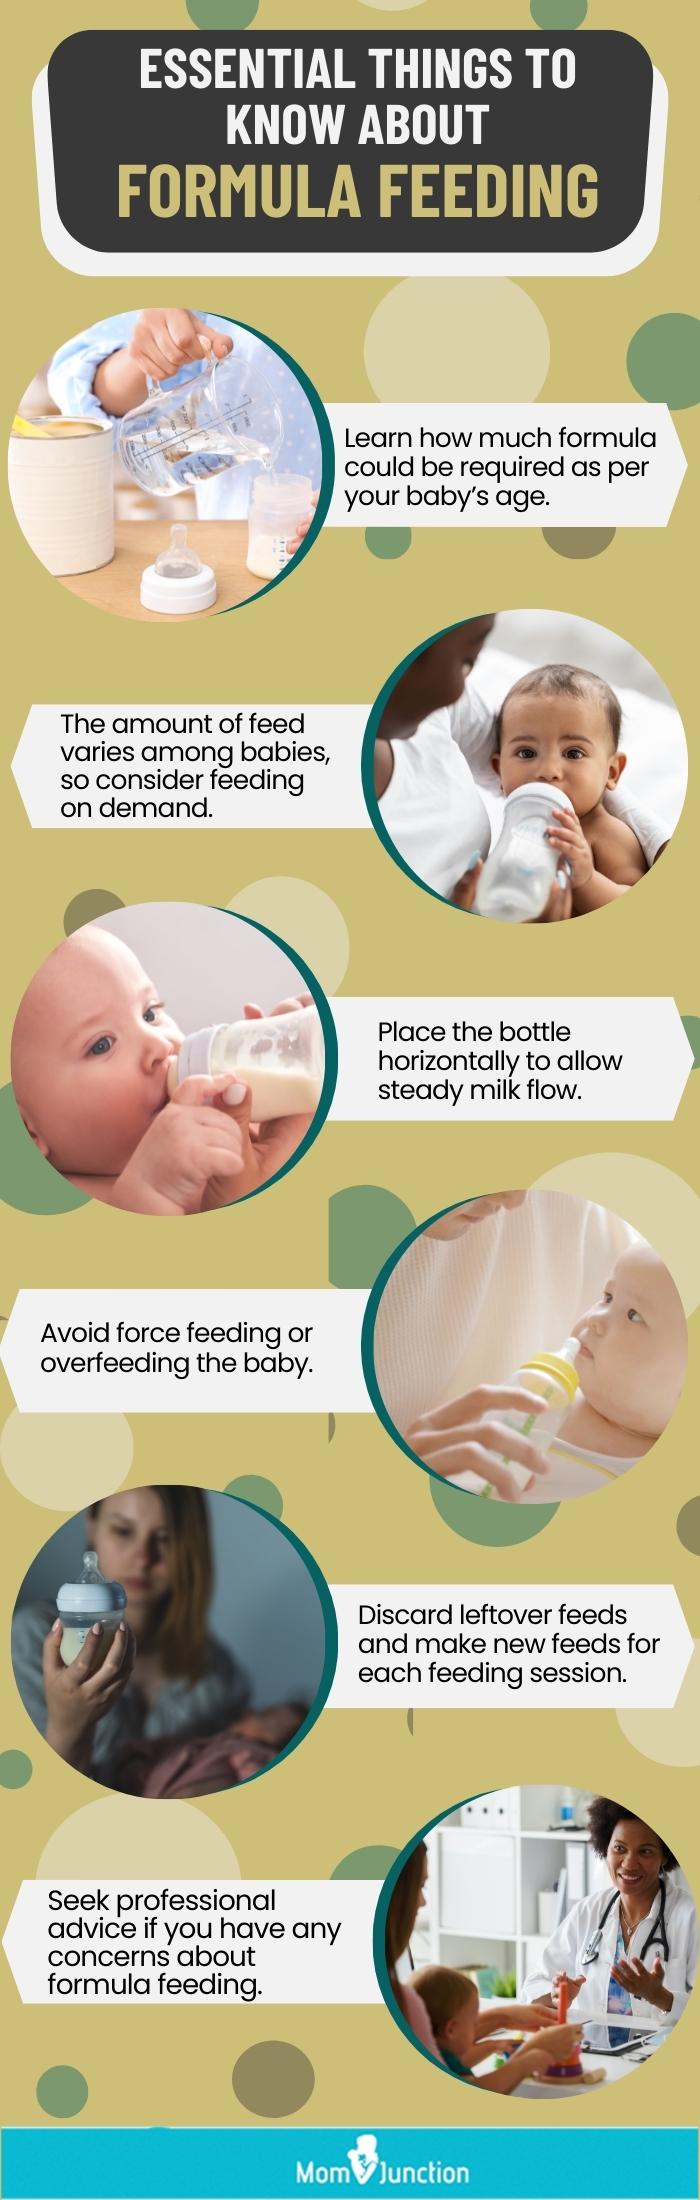 essential things to know about formula feeding (infographic)